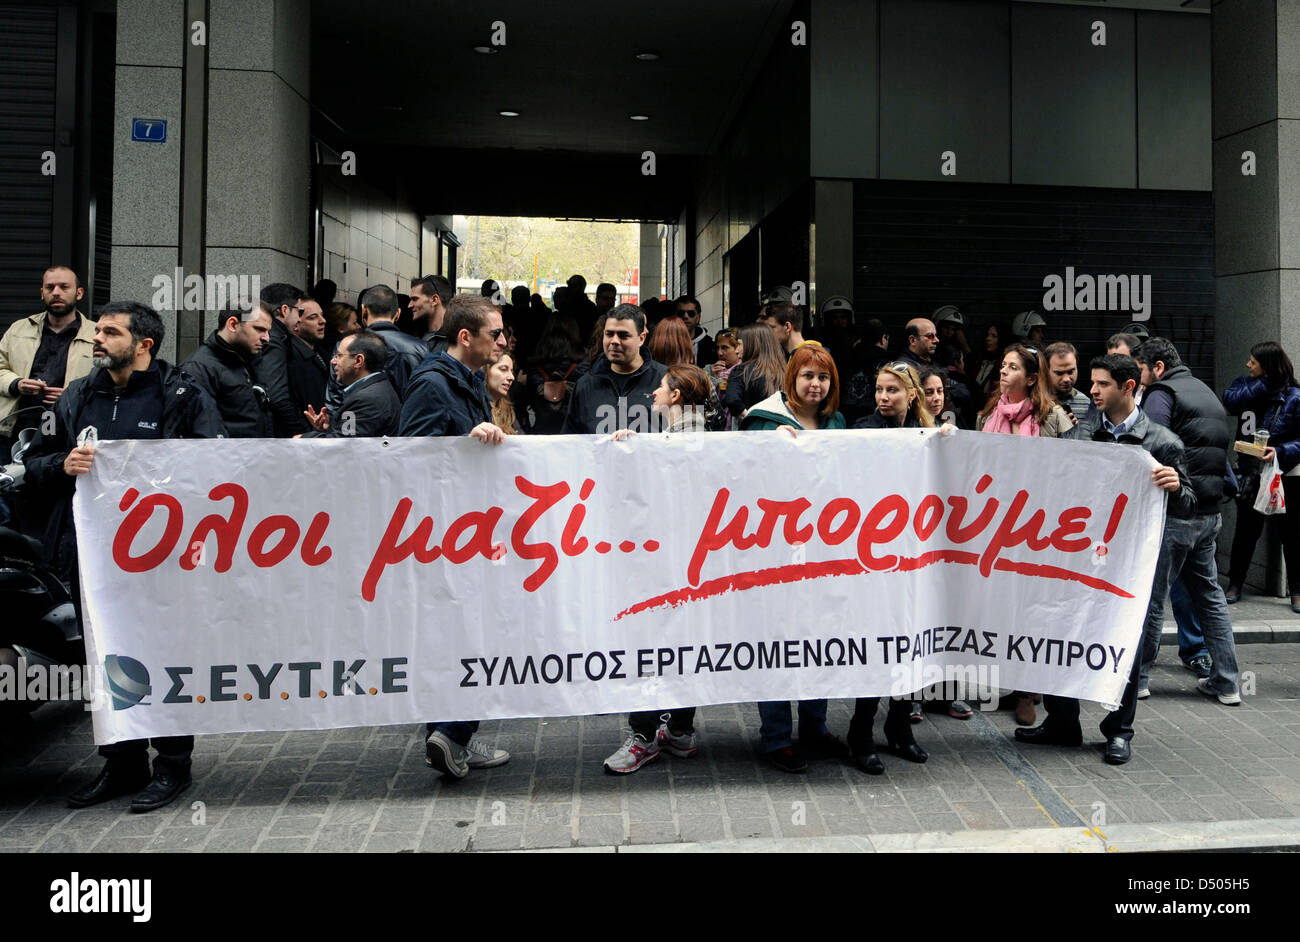 Athens, Greece. 21st March 2013. Employees of Cyprus based banks hold a protest banner saying “together we can” outside the Greek Finance Ministry in Athens. Credit: Giorgos Nikolaidis/Alamy Live News Stock Photo